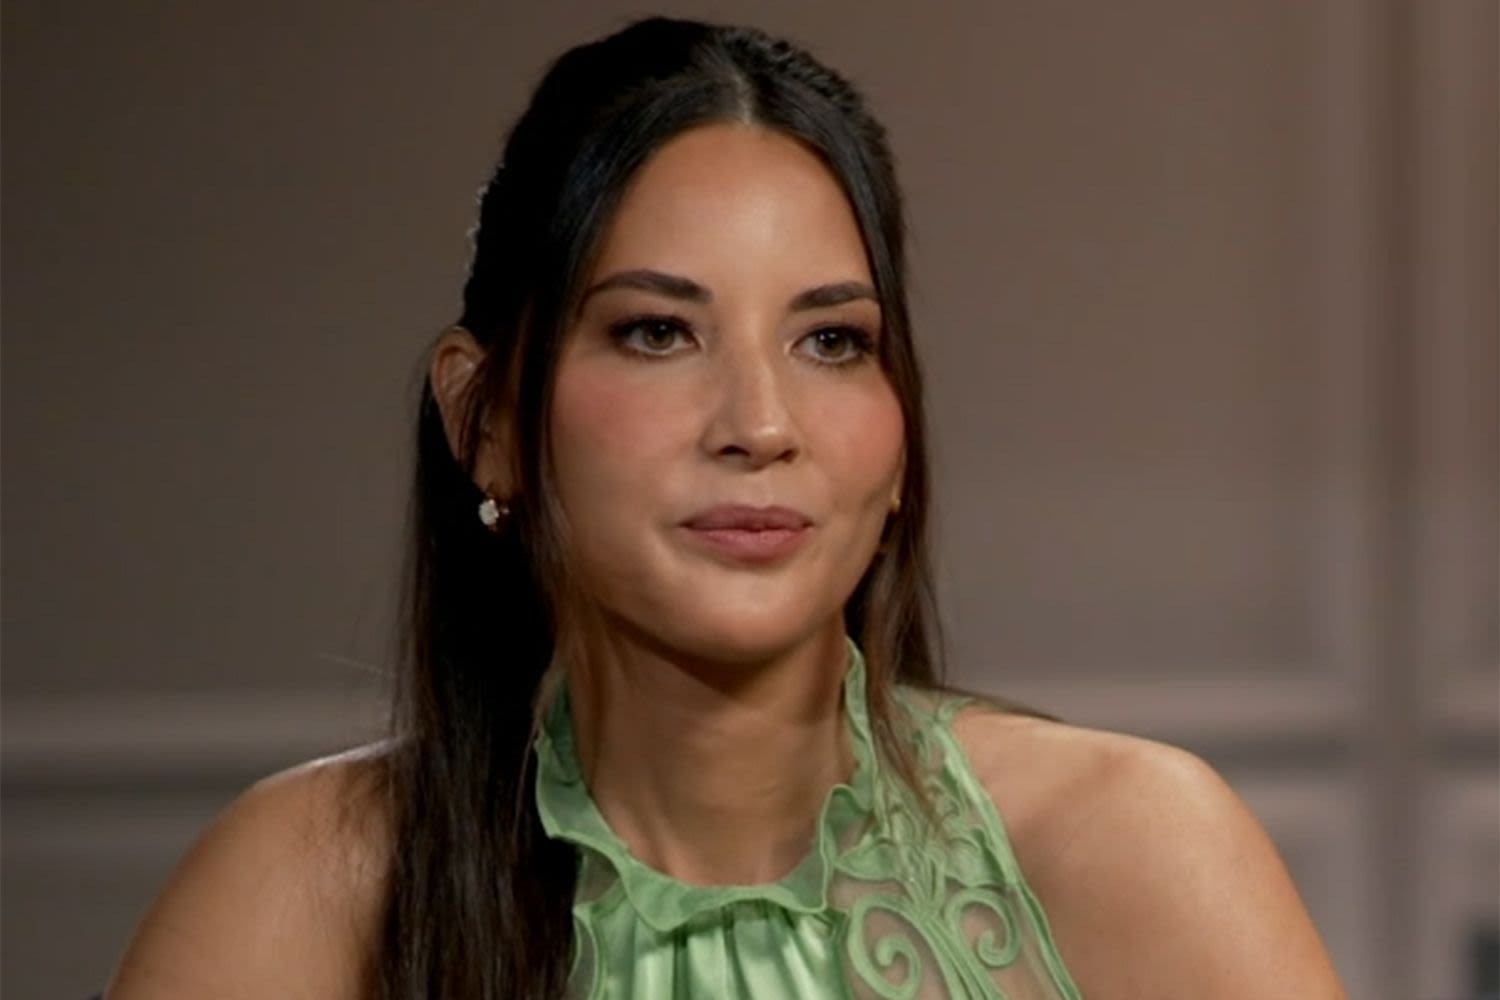 Olivia Munn Says She Documented Her Cancer Journey for Her Son: ‘If I Didn’t Make It’ He Would Know ‘I...